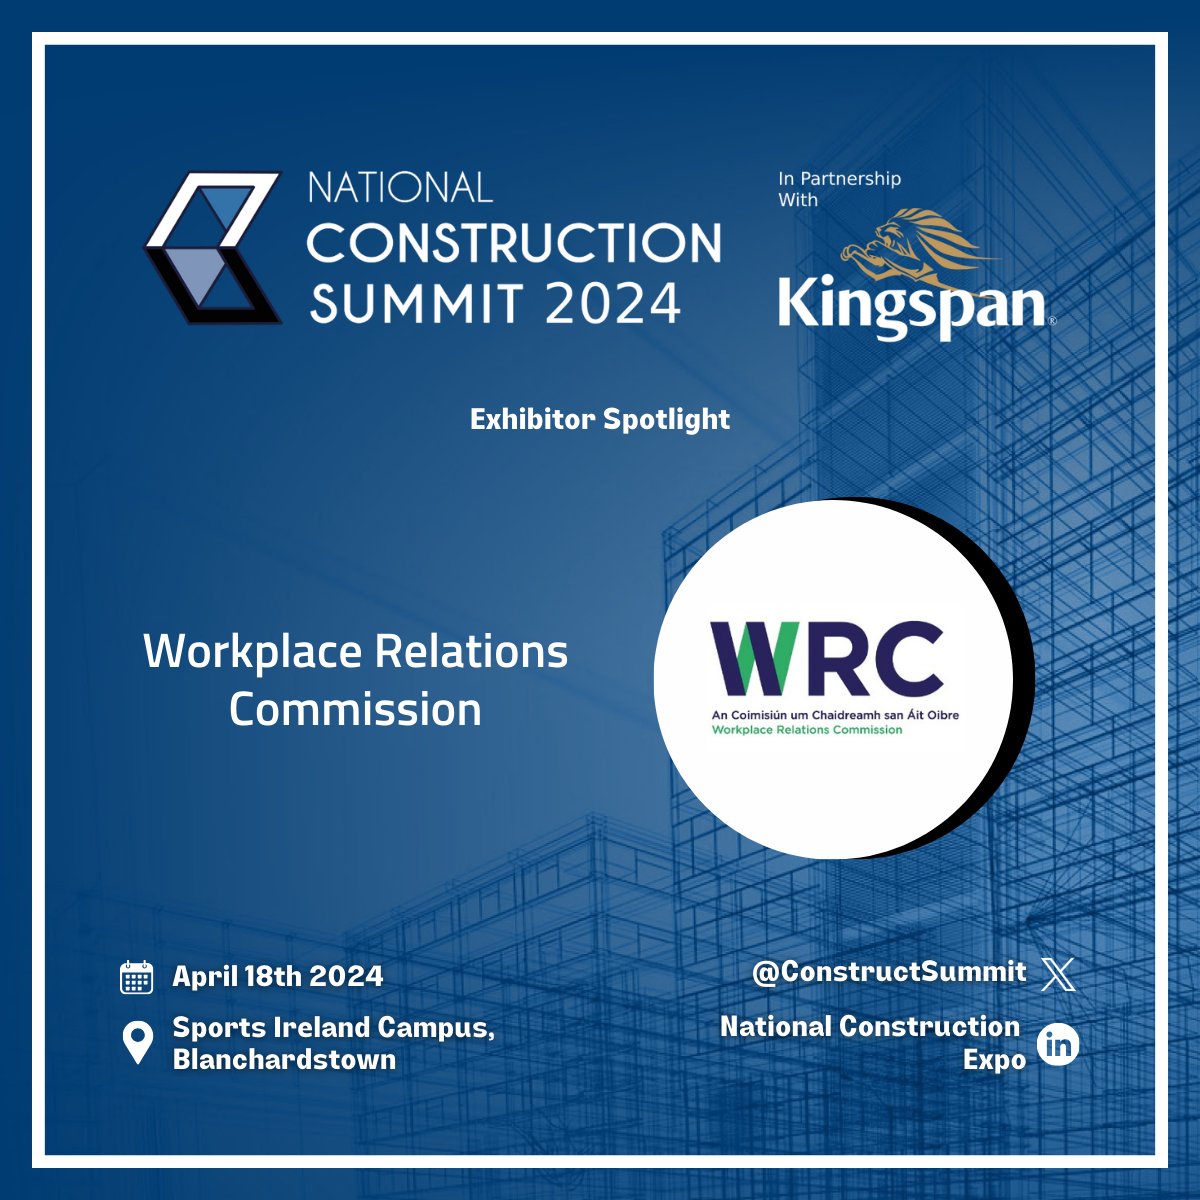 The WRC are exhibiting at the National Construction Summit on 18 April 2024, Sport Ireland Campus, Blanchardstown, Stand I 33 Our Information Officers and specialist personnel will be available to answer your employment law queries Register for free ➡️ bit.ly/3SYprDN